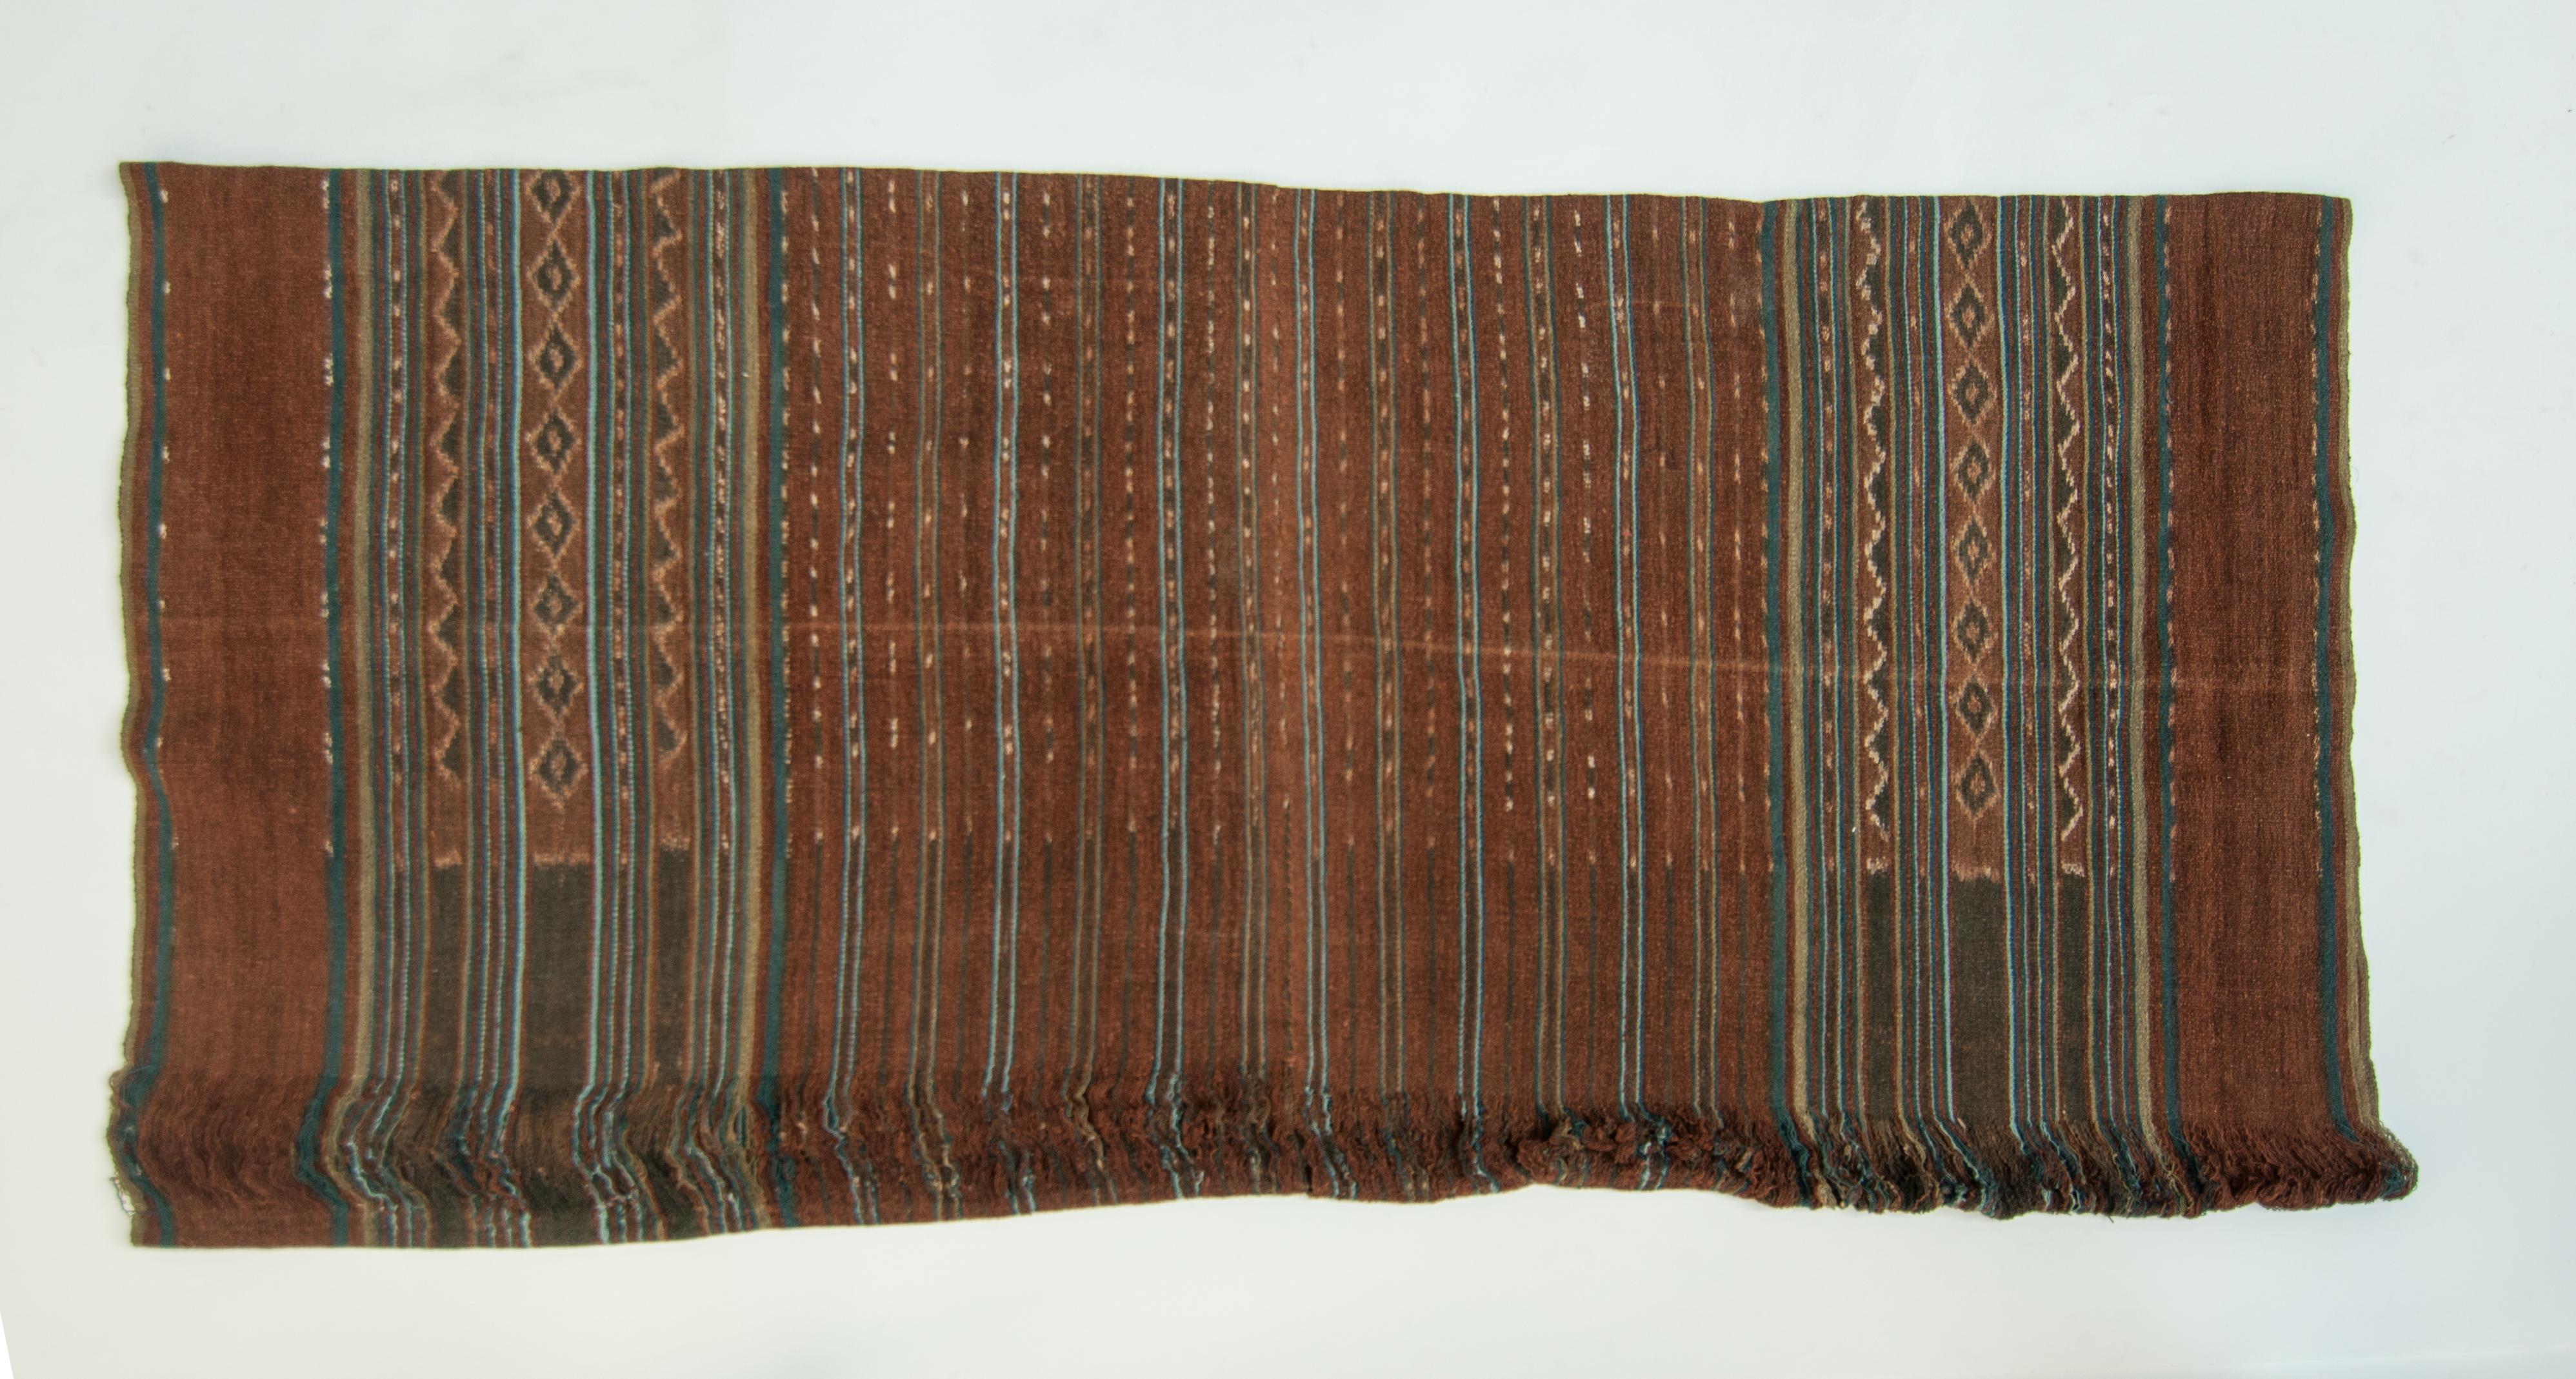 Vintage handspun cotton Ikat. Uncut warp. Lembata, Indonesia. mid-20th century.
This sarong comprises two panels, each woven on a traditional backstrap loom and then sewn together. It was never worn, but was given as part of a wedding gift